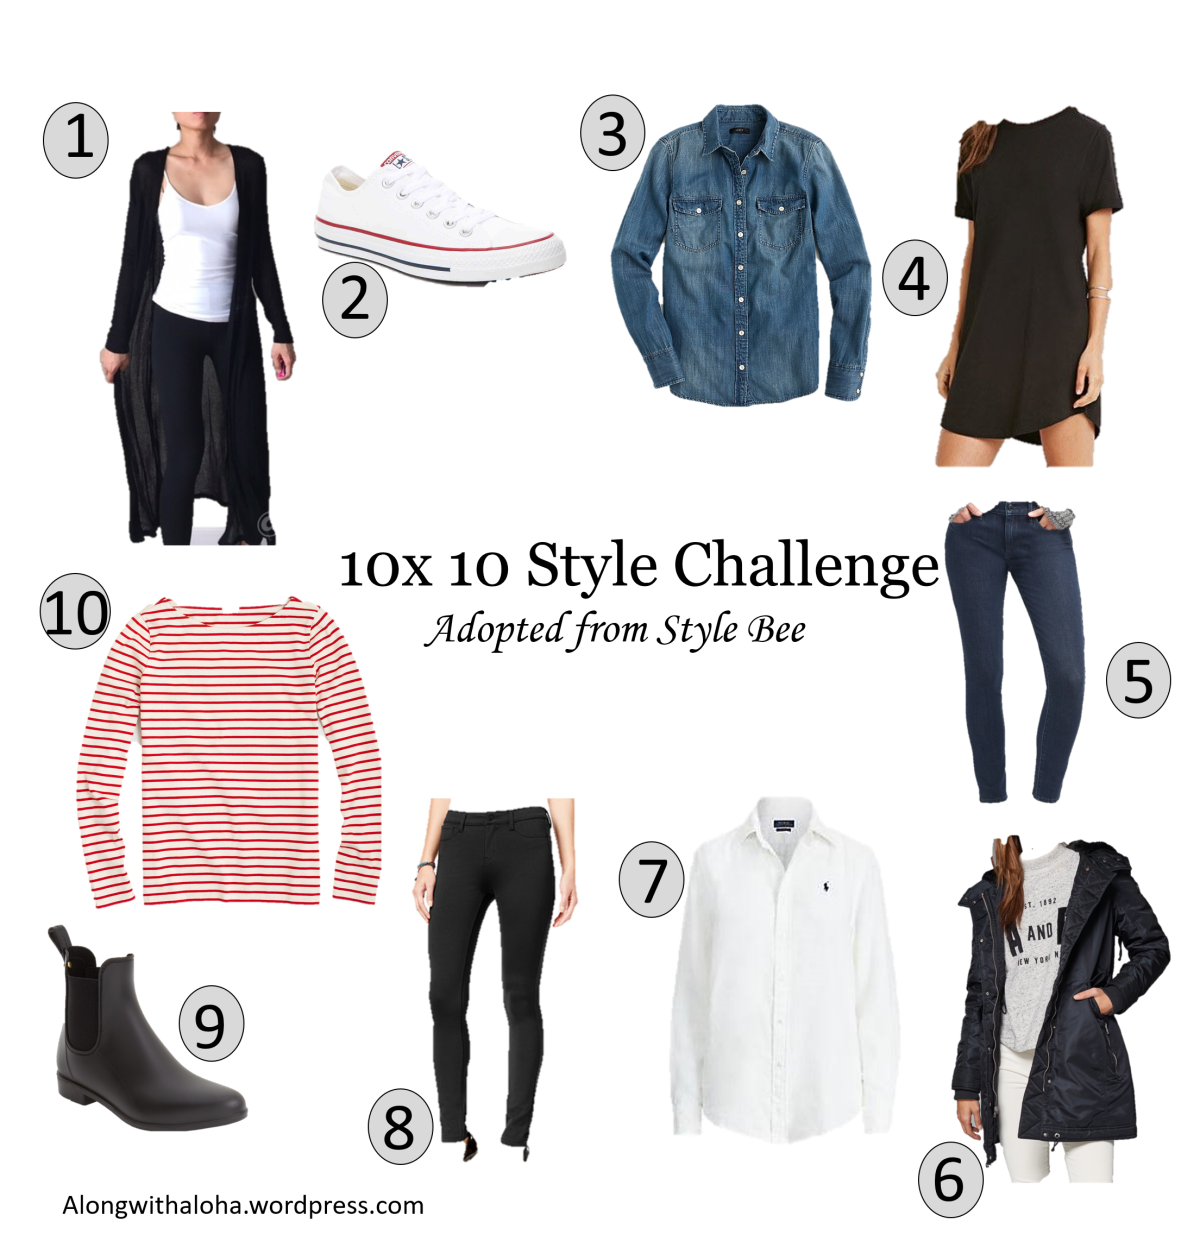 10 x 10 Challenge: What I Would Wear in a Spring Edition